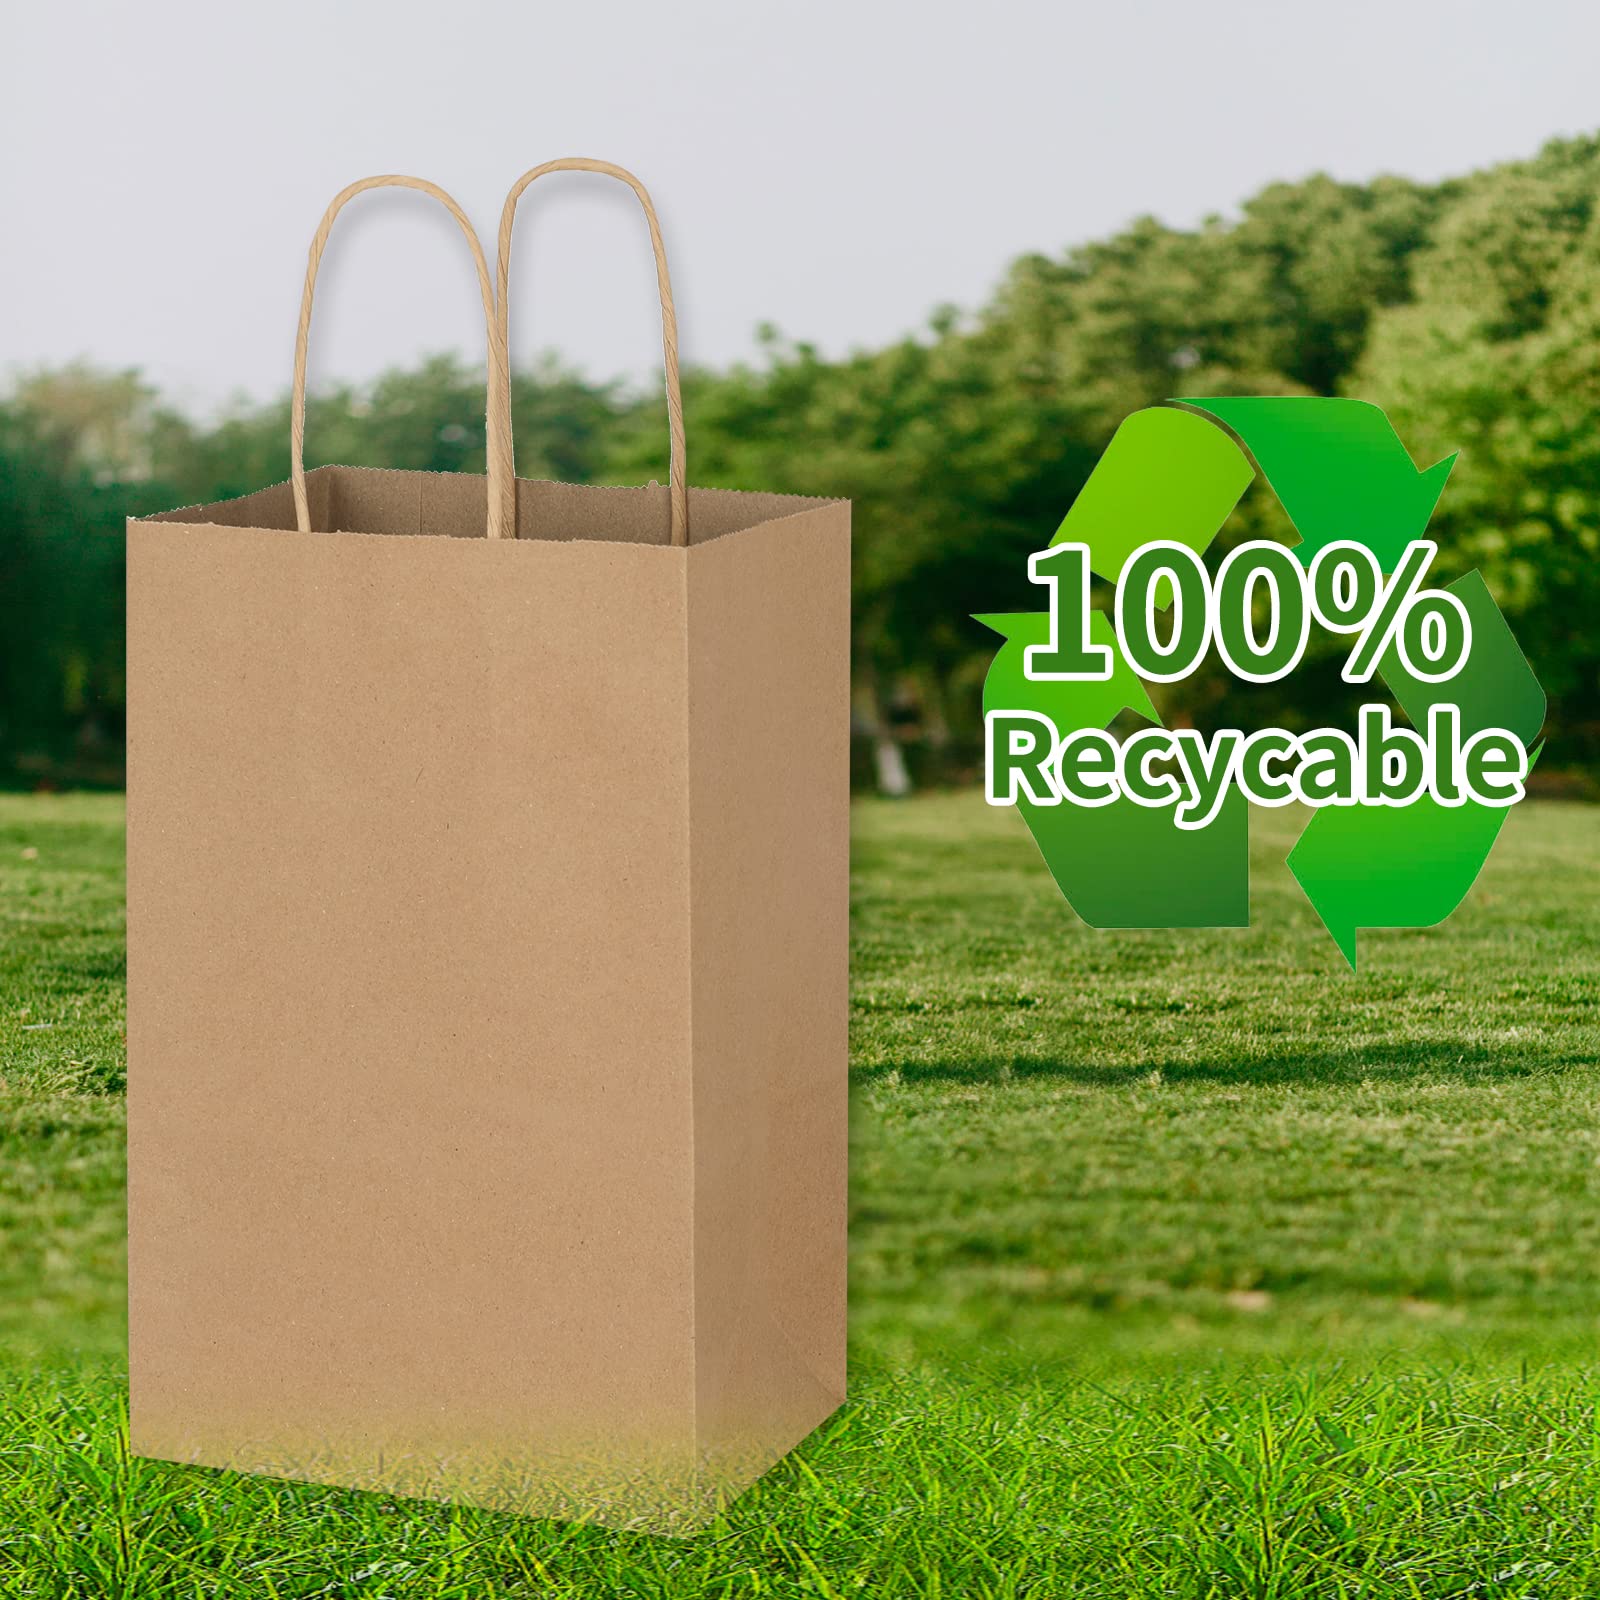 Toovip 100 Pack 5.25x3.25x8.25 Inch Small Plain Brown Kraft Paper Bags with Handles Bulk, Gift Bags for Favor Grocery Retail Party Birthday Shopping Business Goody Craft Merchandise Take Out Sacks